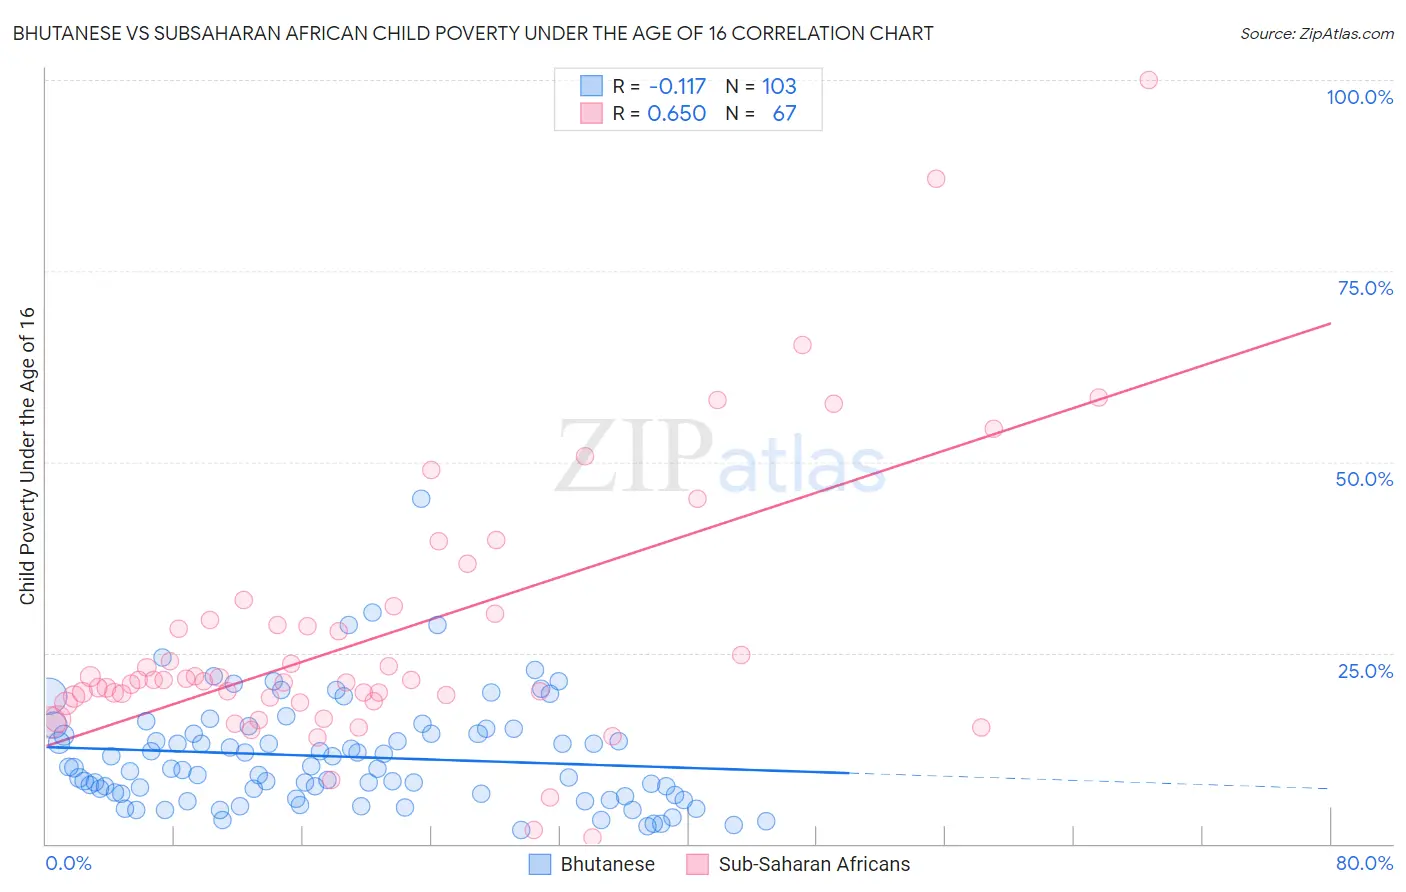 Bhutanese vs Subsaharan African Child Poverty Under the Age of 16